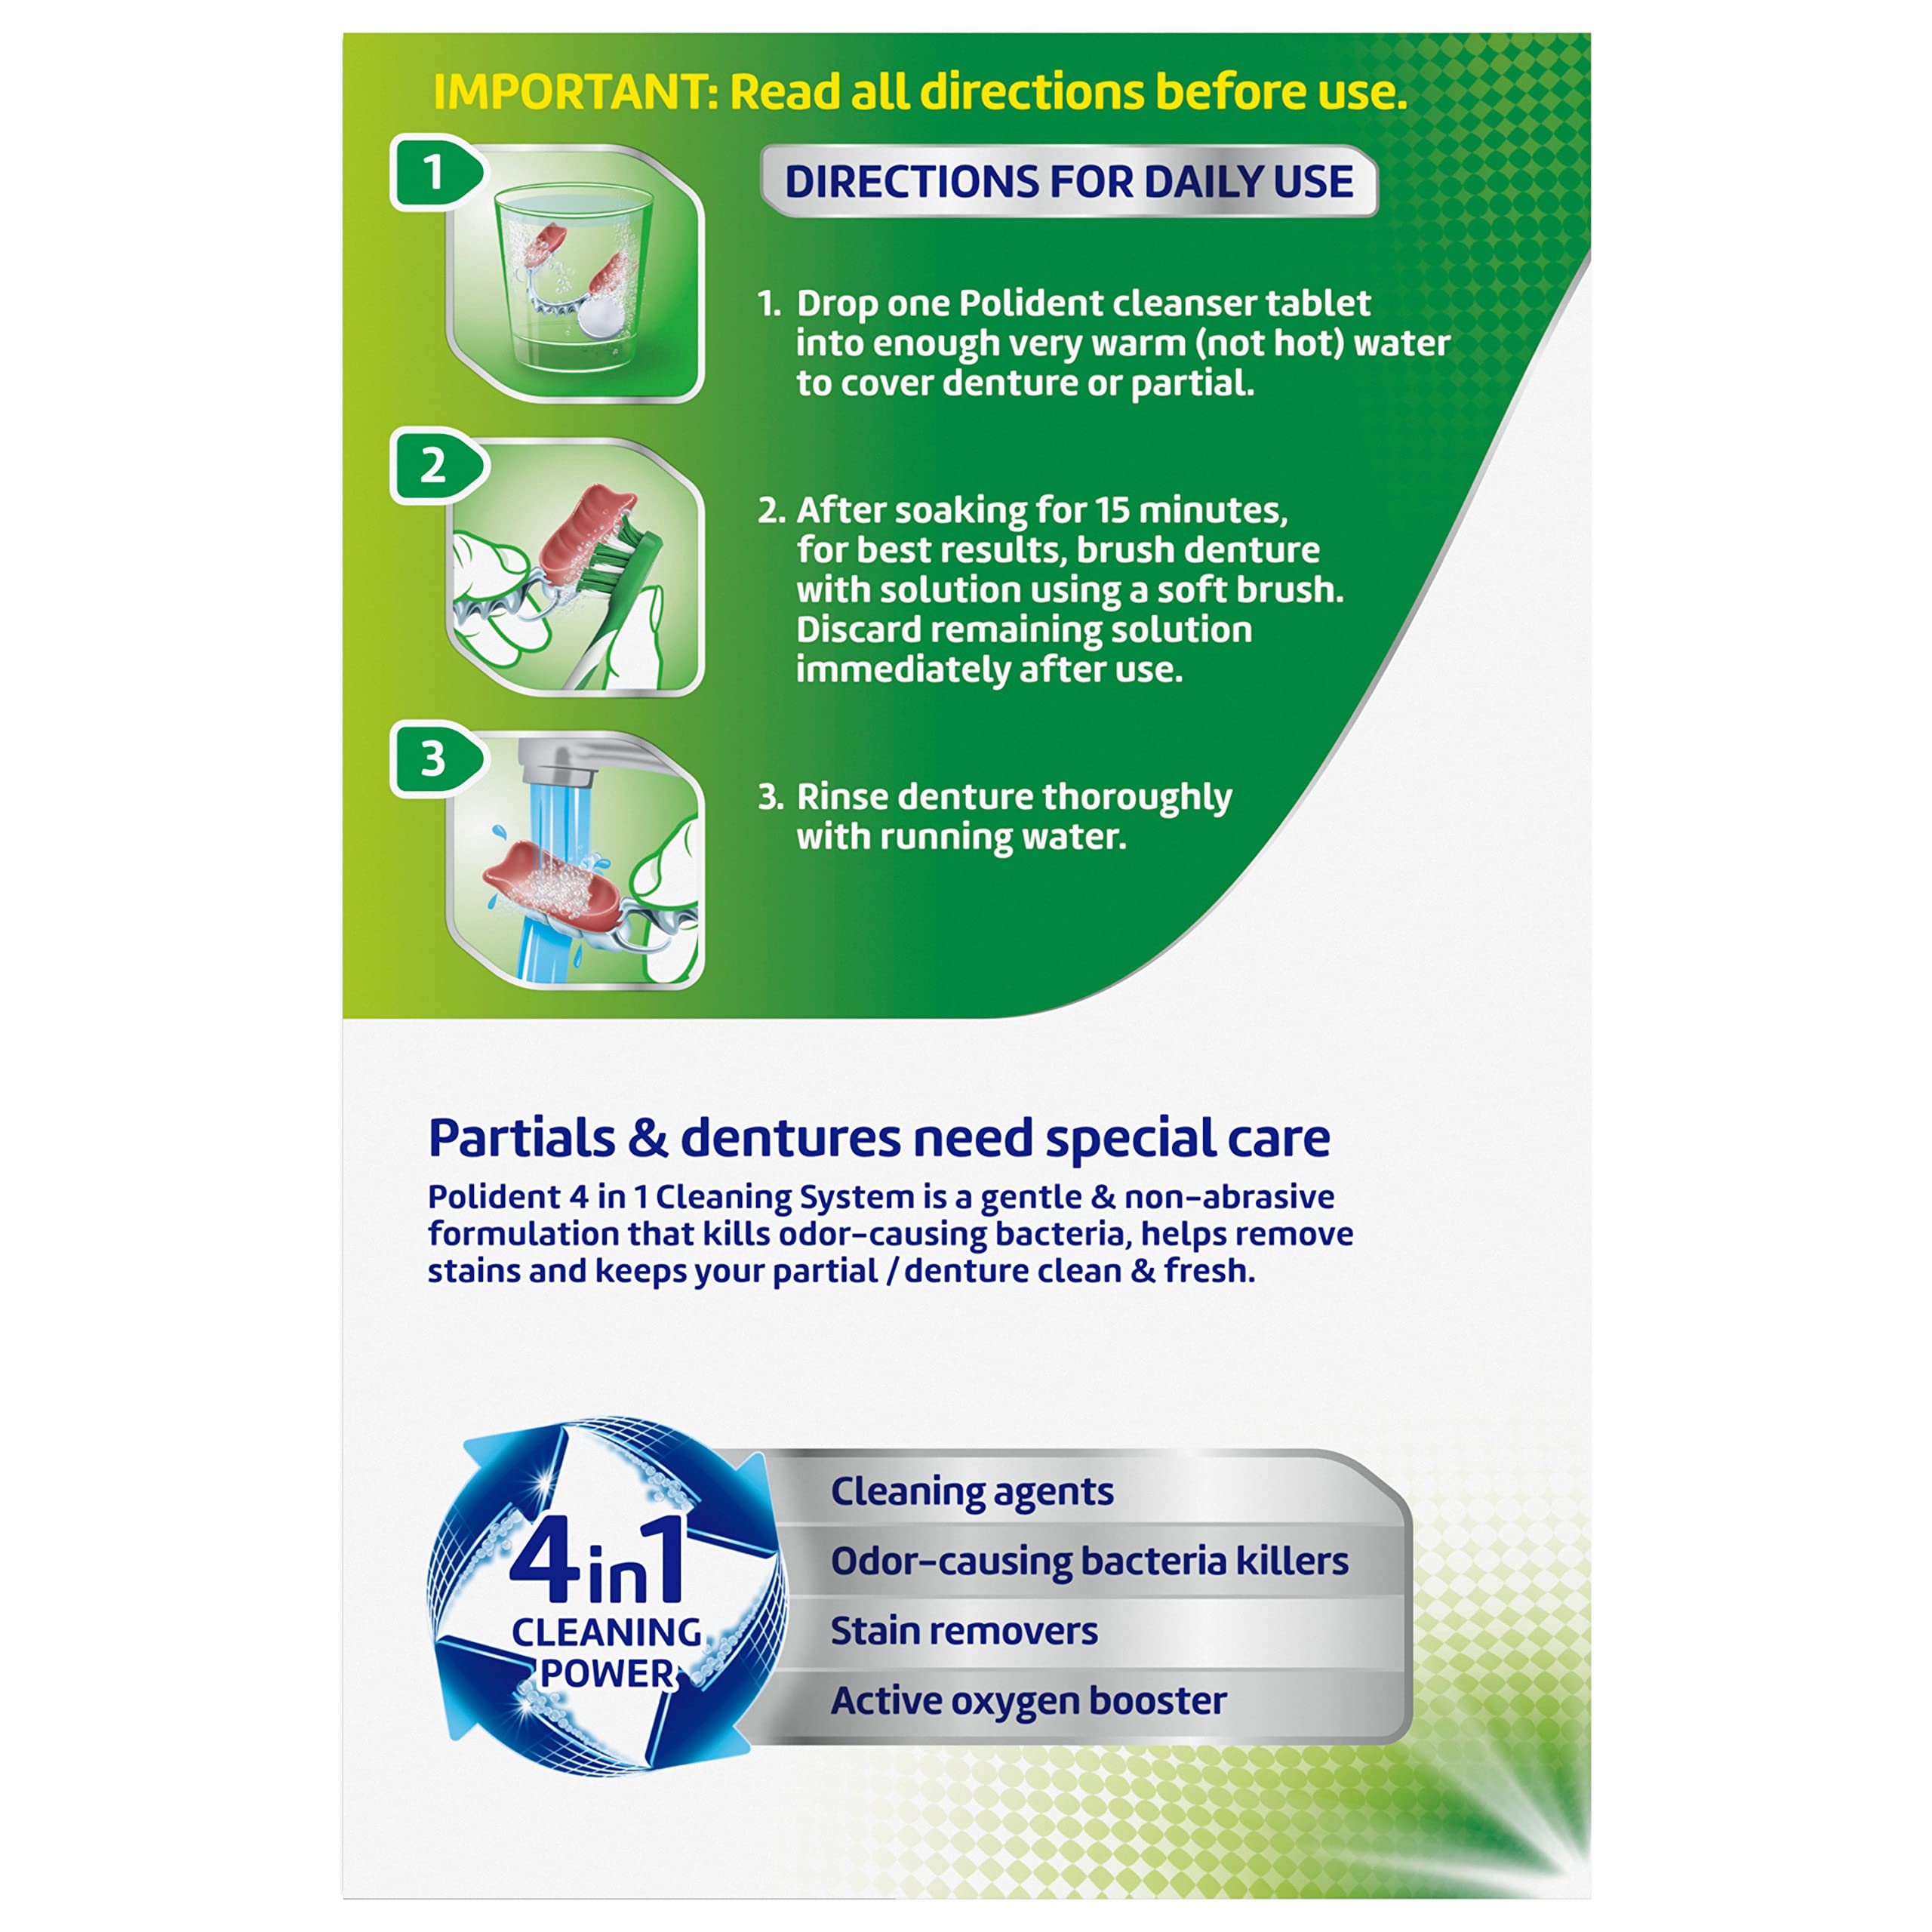 Polident Smokers Antibacterial Denture Cleanser Effervescent Tablets - 120Ct